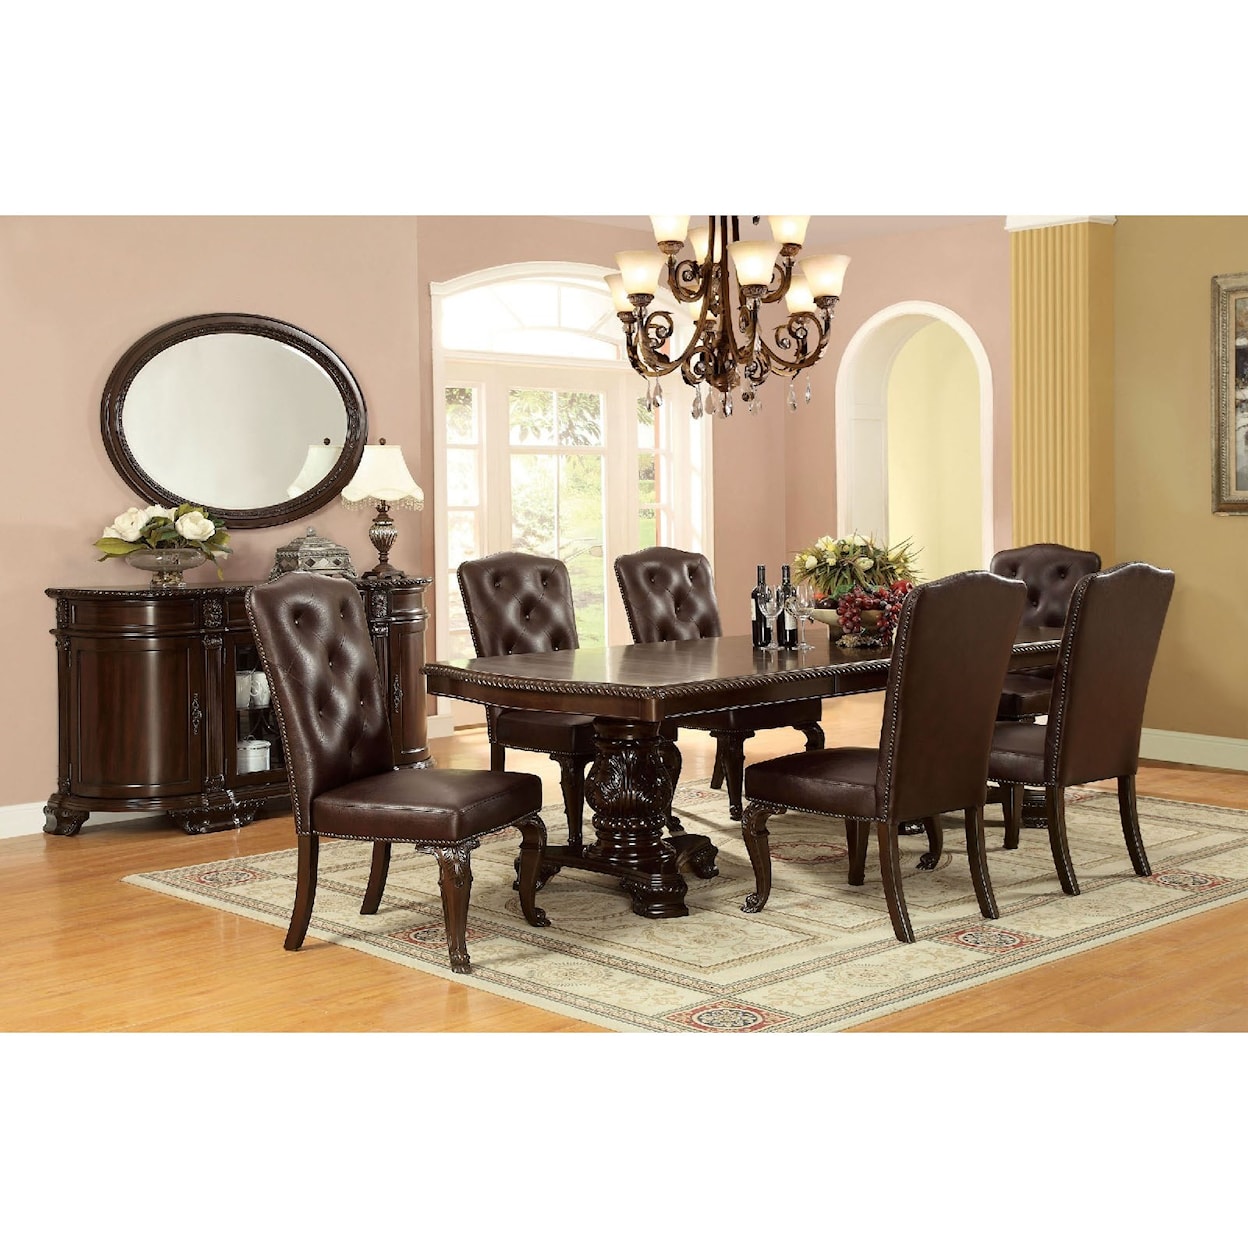 FUSA Bellagio Dining Table Set with Six Chairs